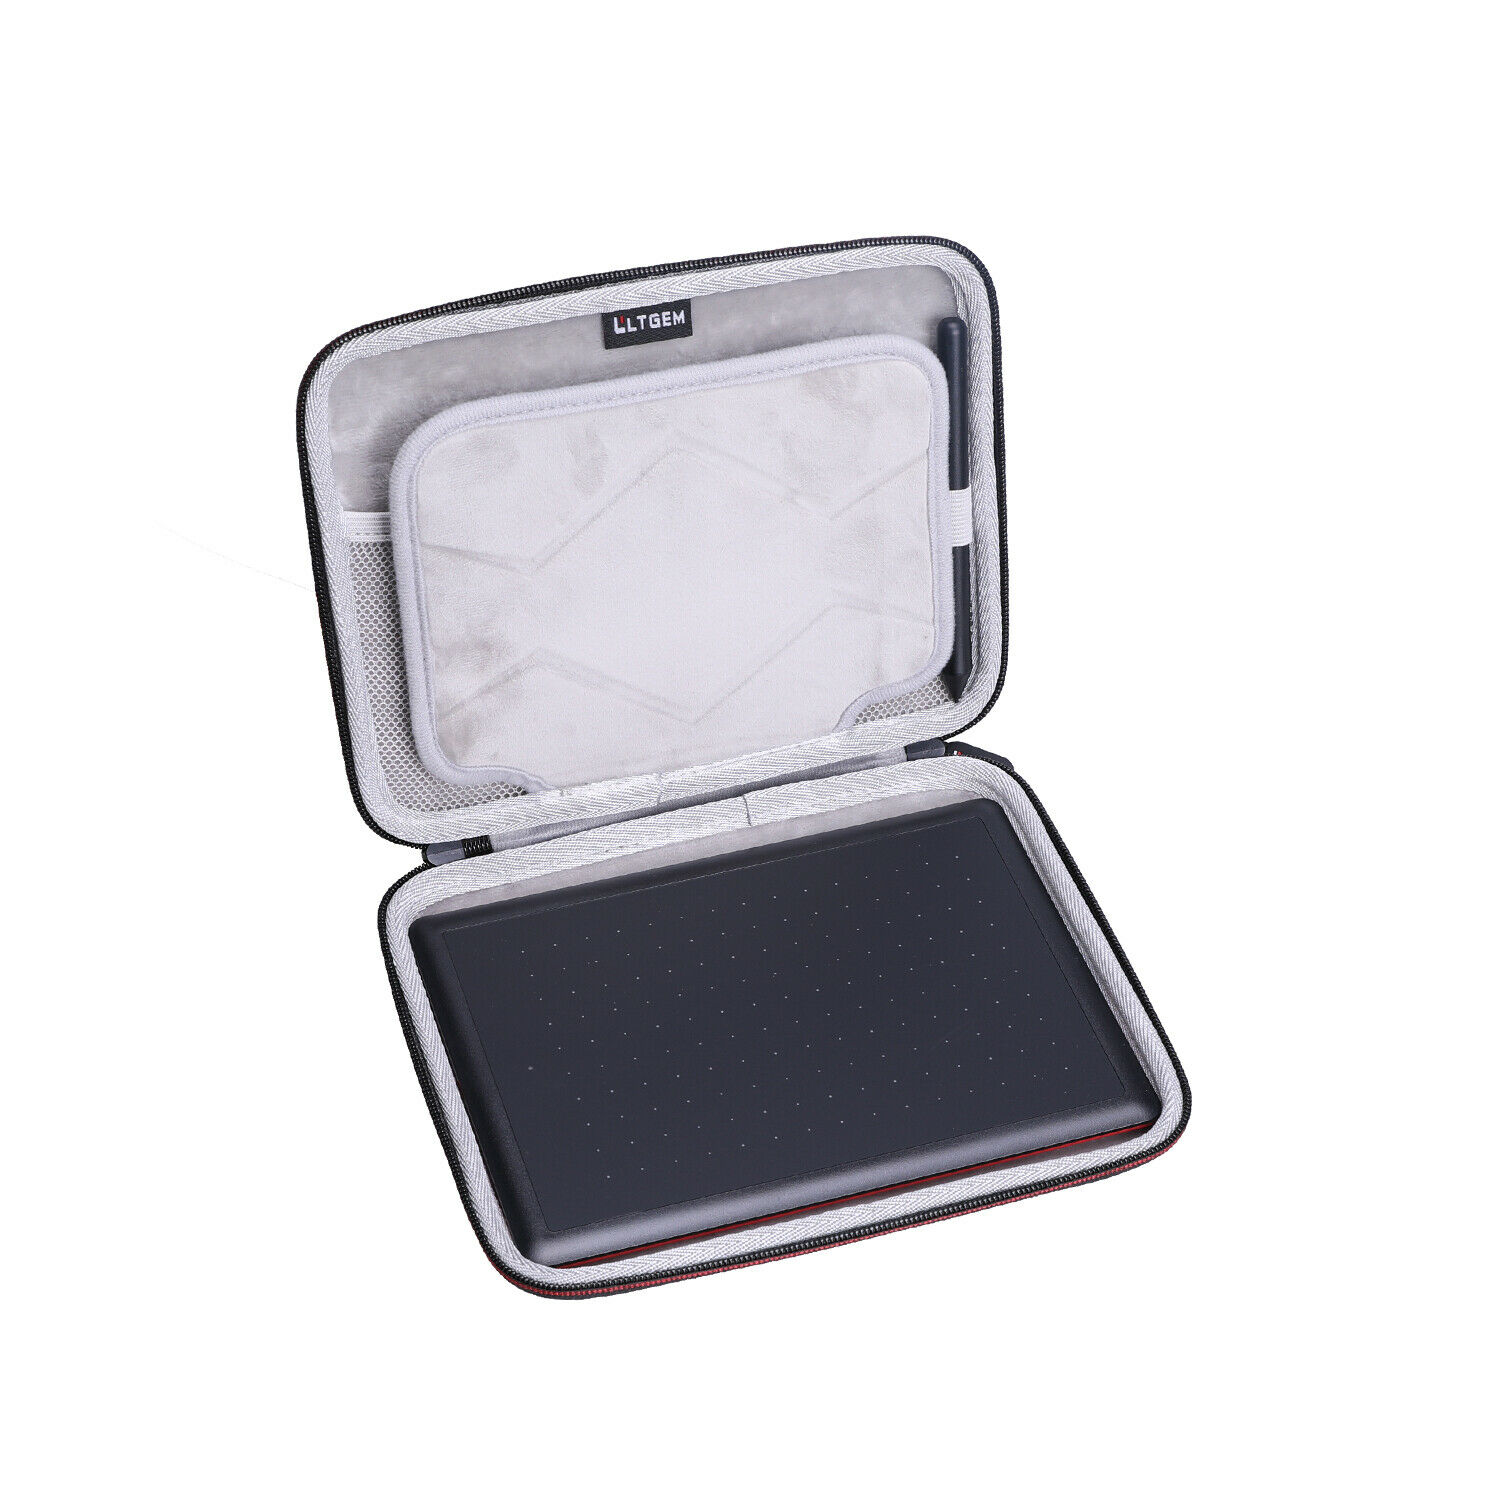 LTGEM Case for Wacom One by Wacom Graphic Drawing Tablet, Small (CTL472K1A)